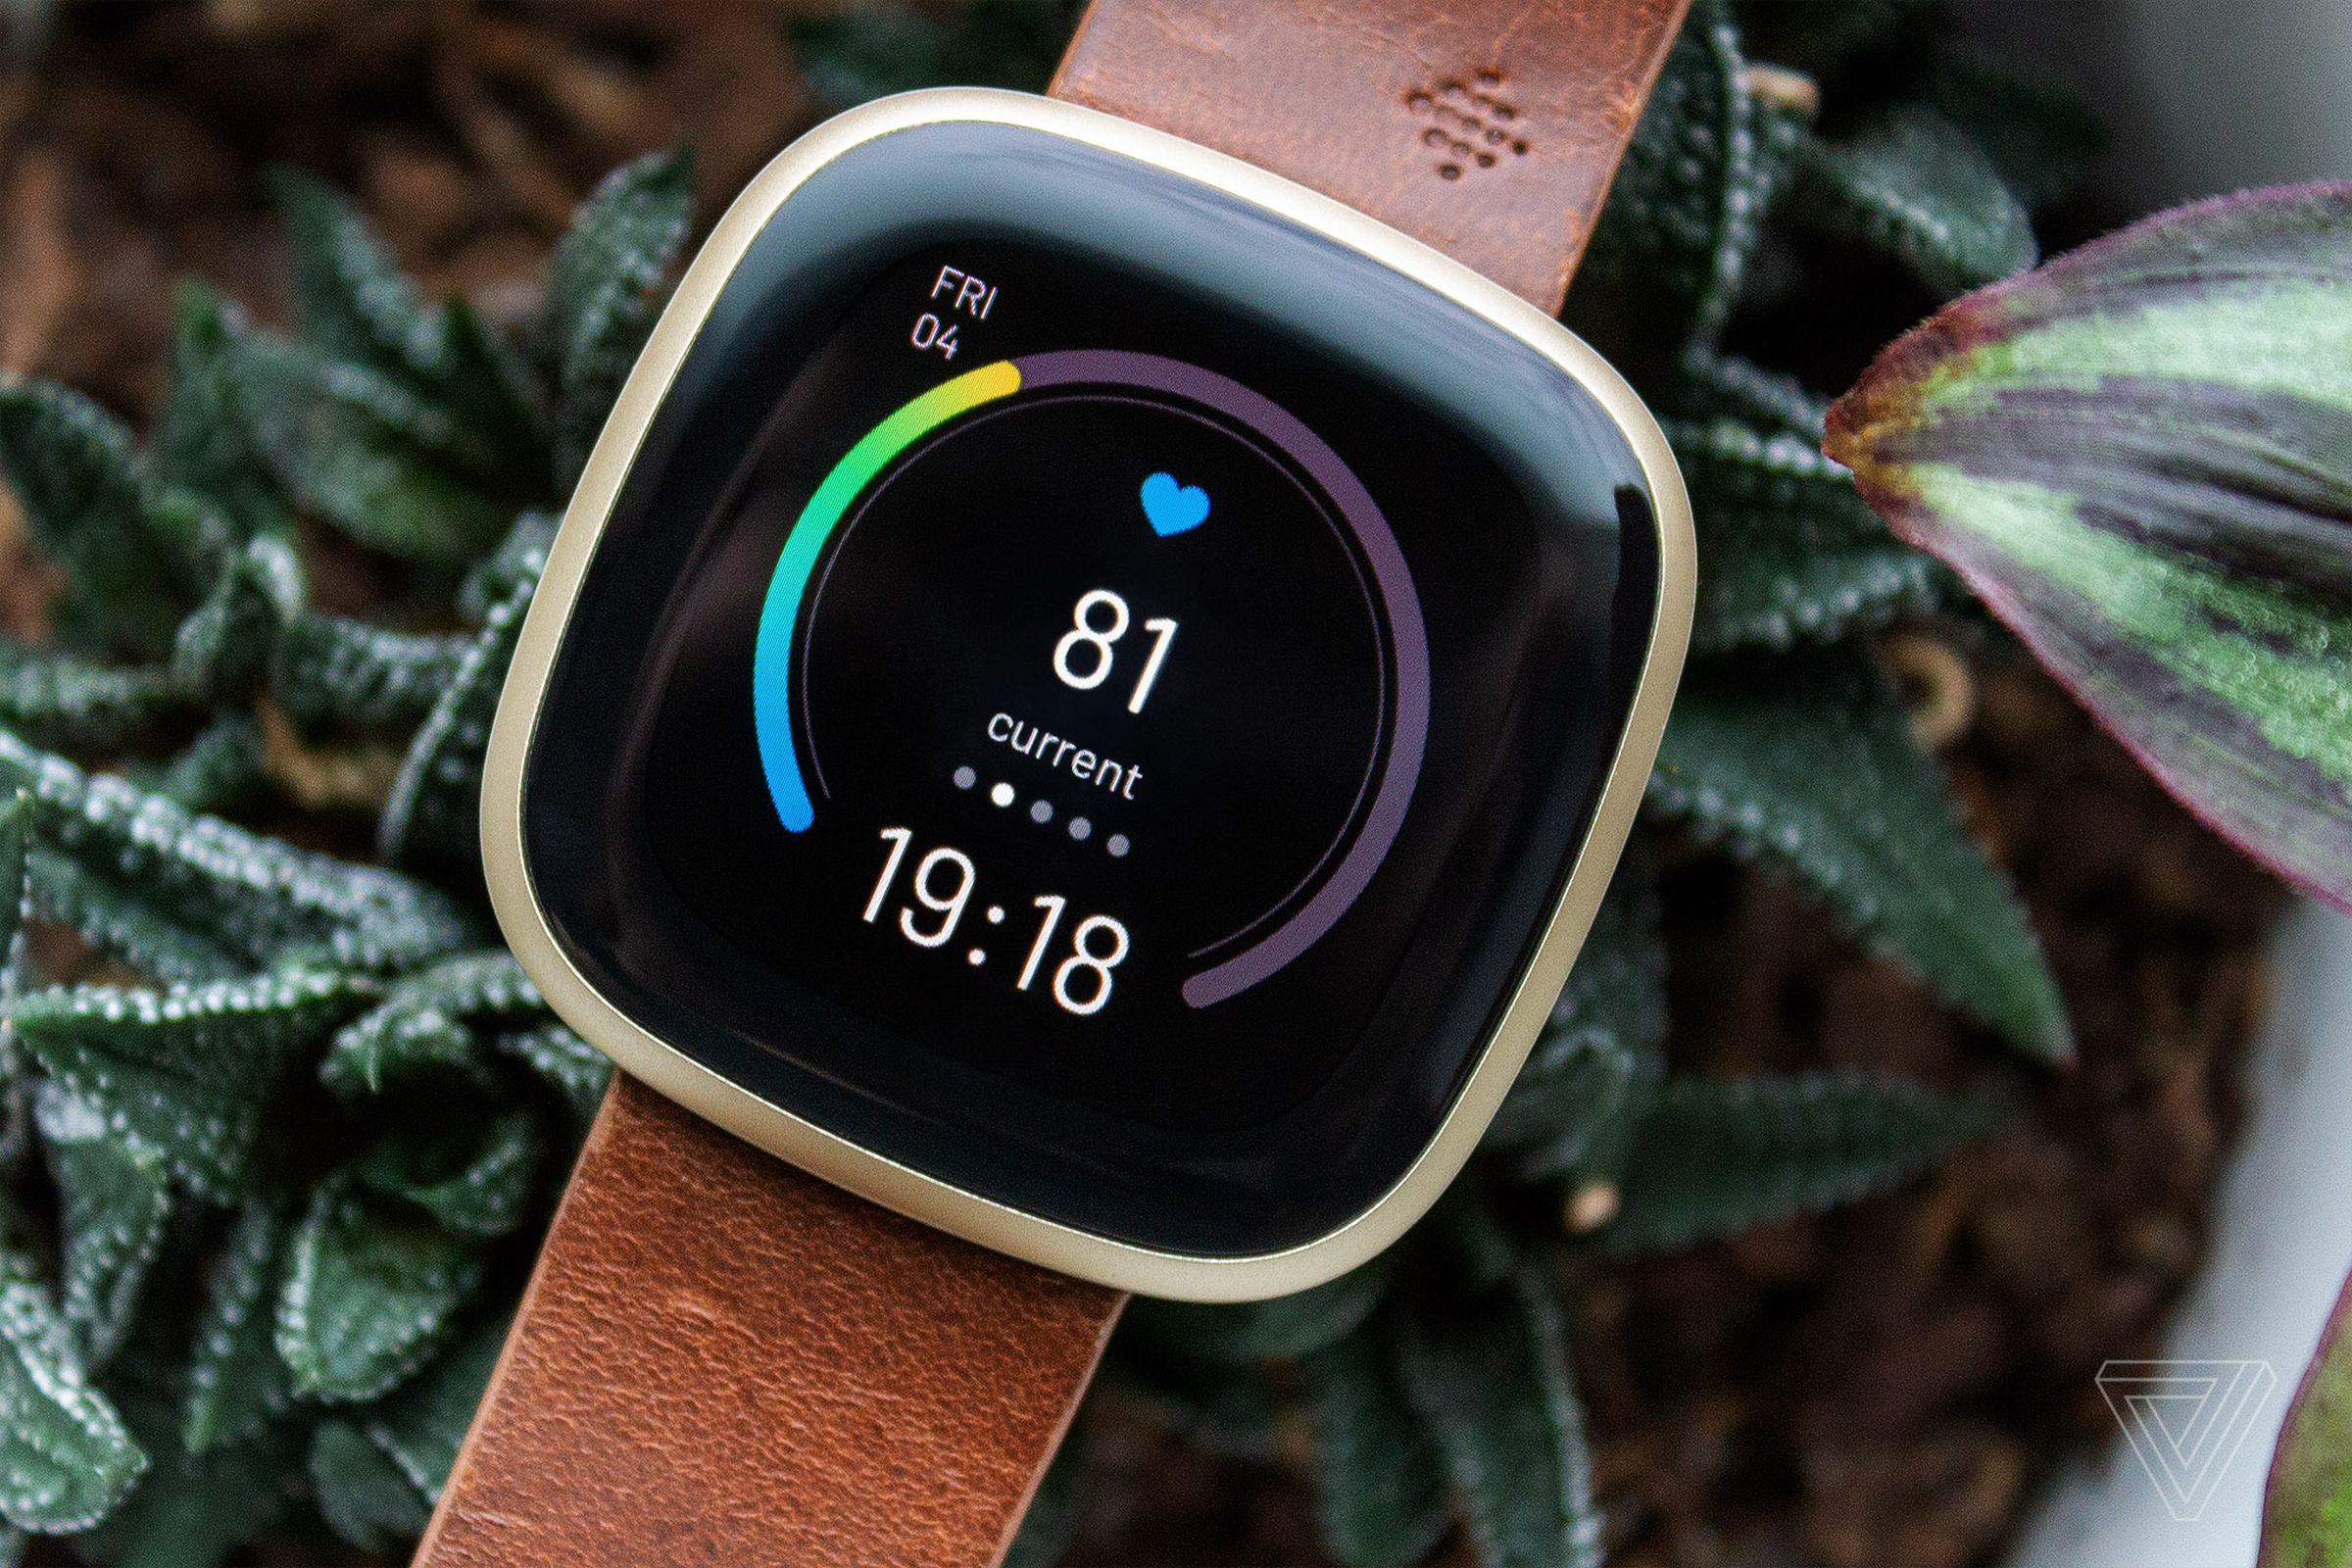 Many smartwatches, including the Fitbit Versa 3, will allow you to view heart rate from your watchface